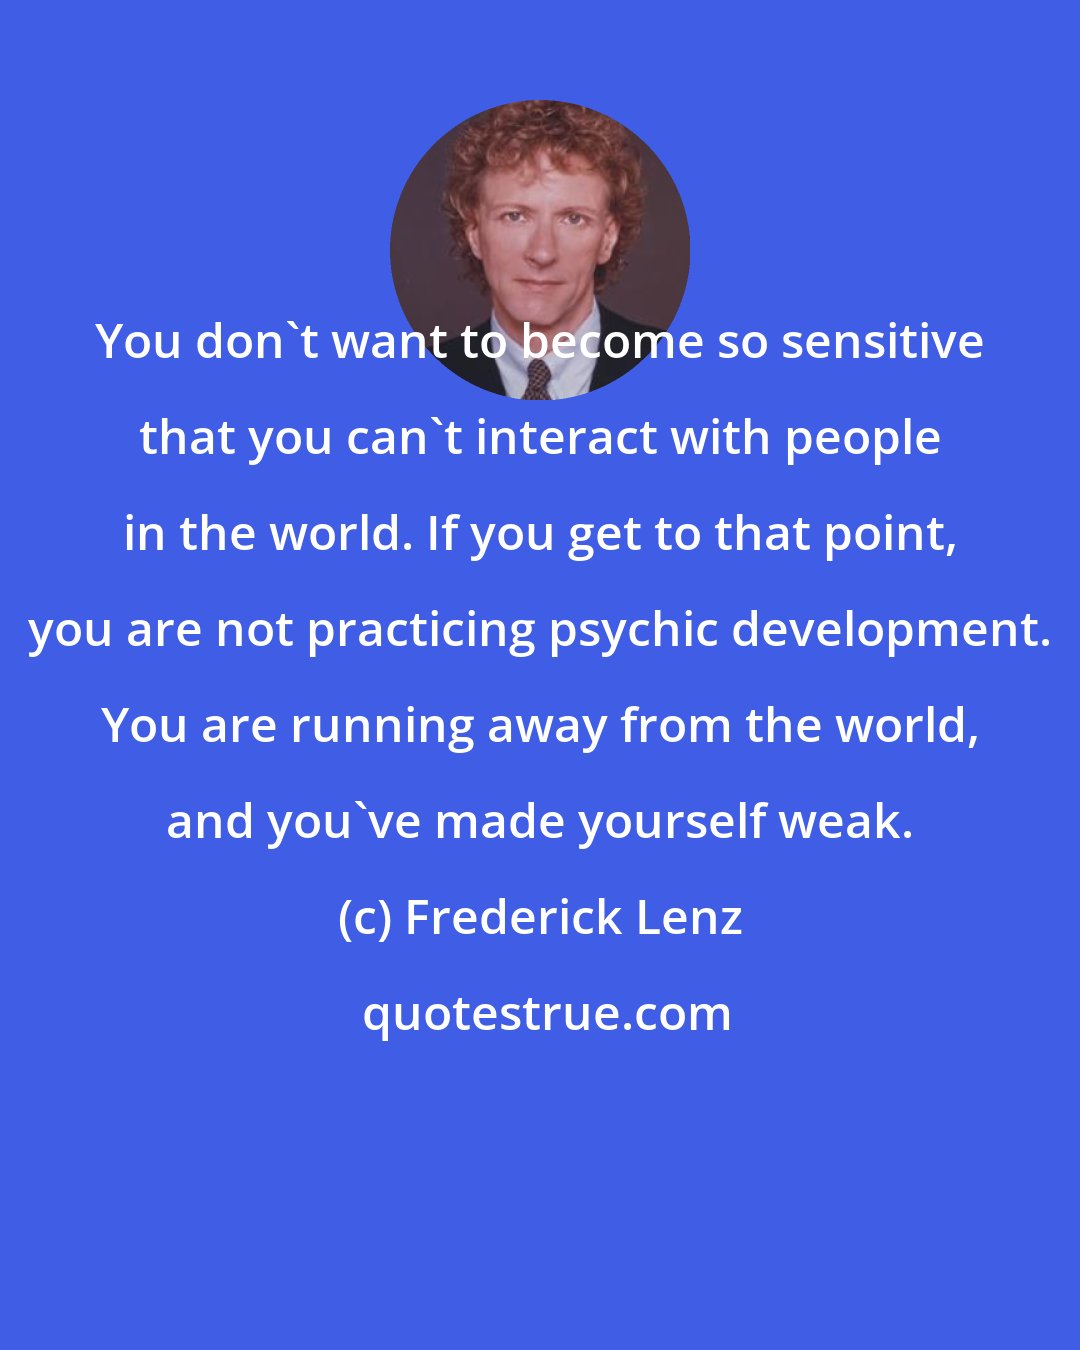 Frederick Lenz: You don't want to become so sensitive that you can't interact with people in the world. If you get to that point, you are not practicing psychic development. You are running away from the world, and you've made yourself weak.